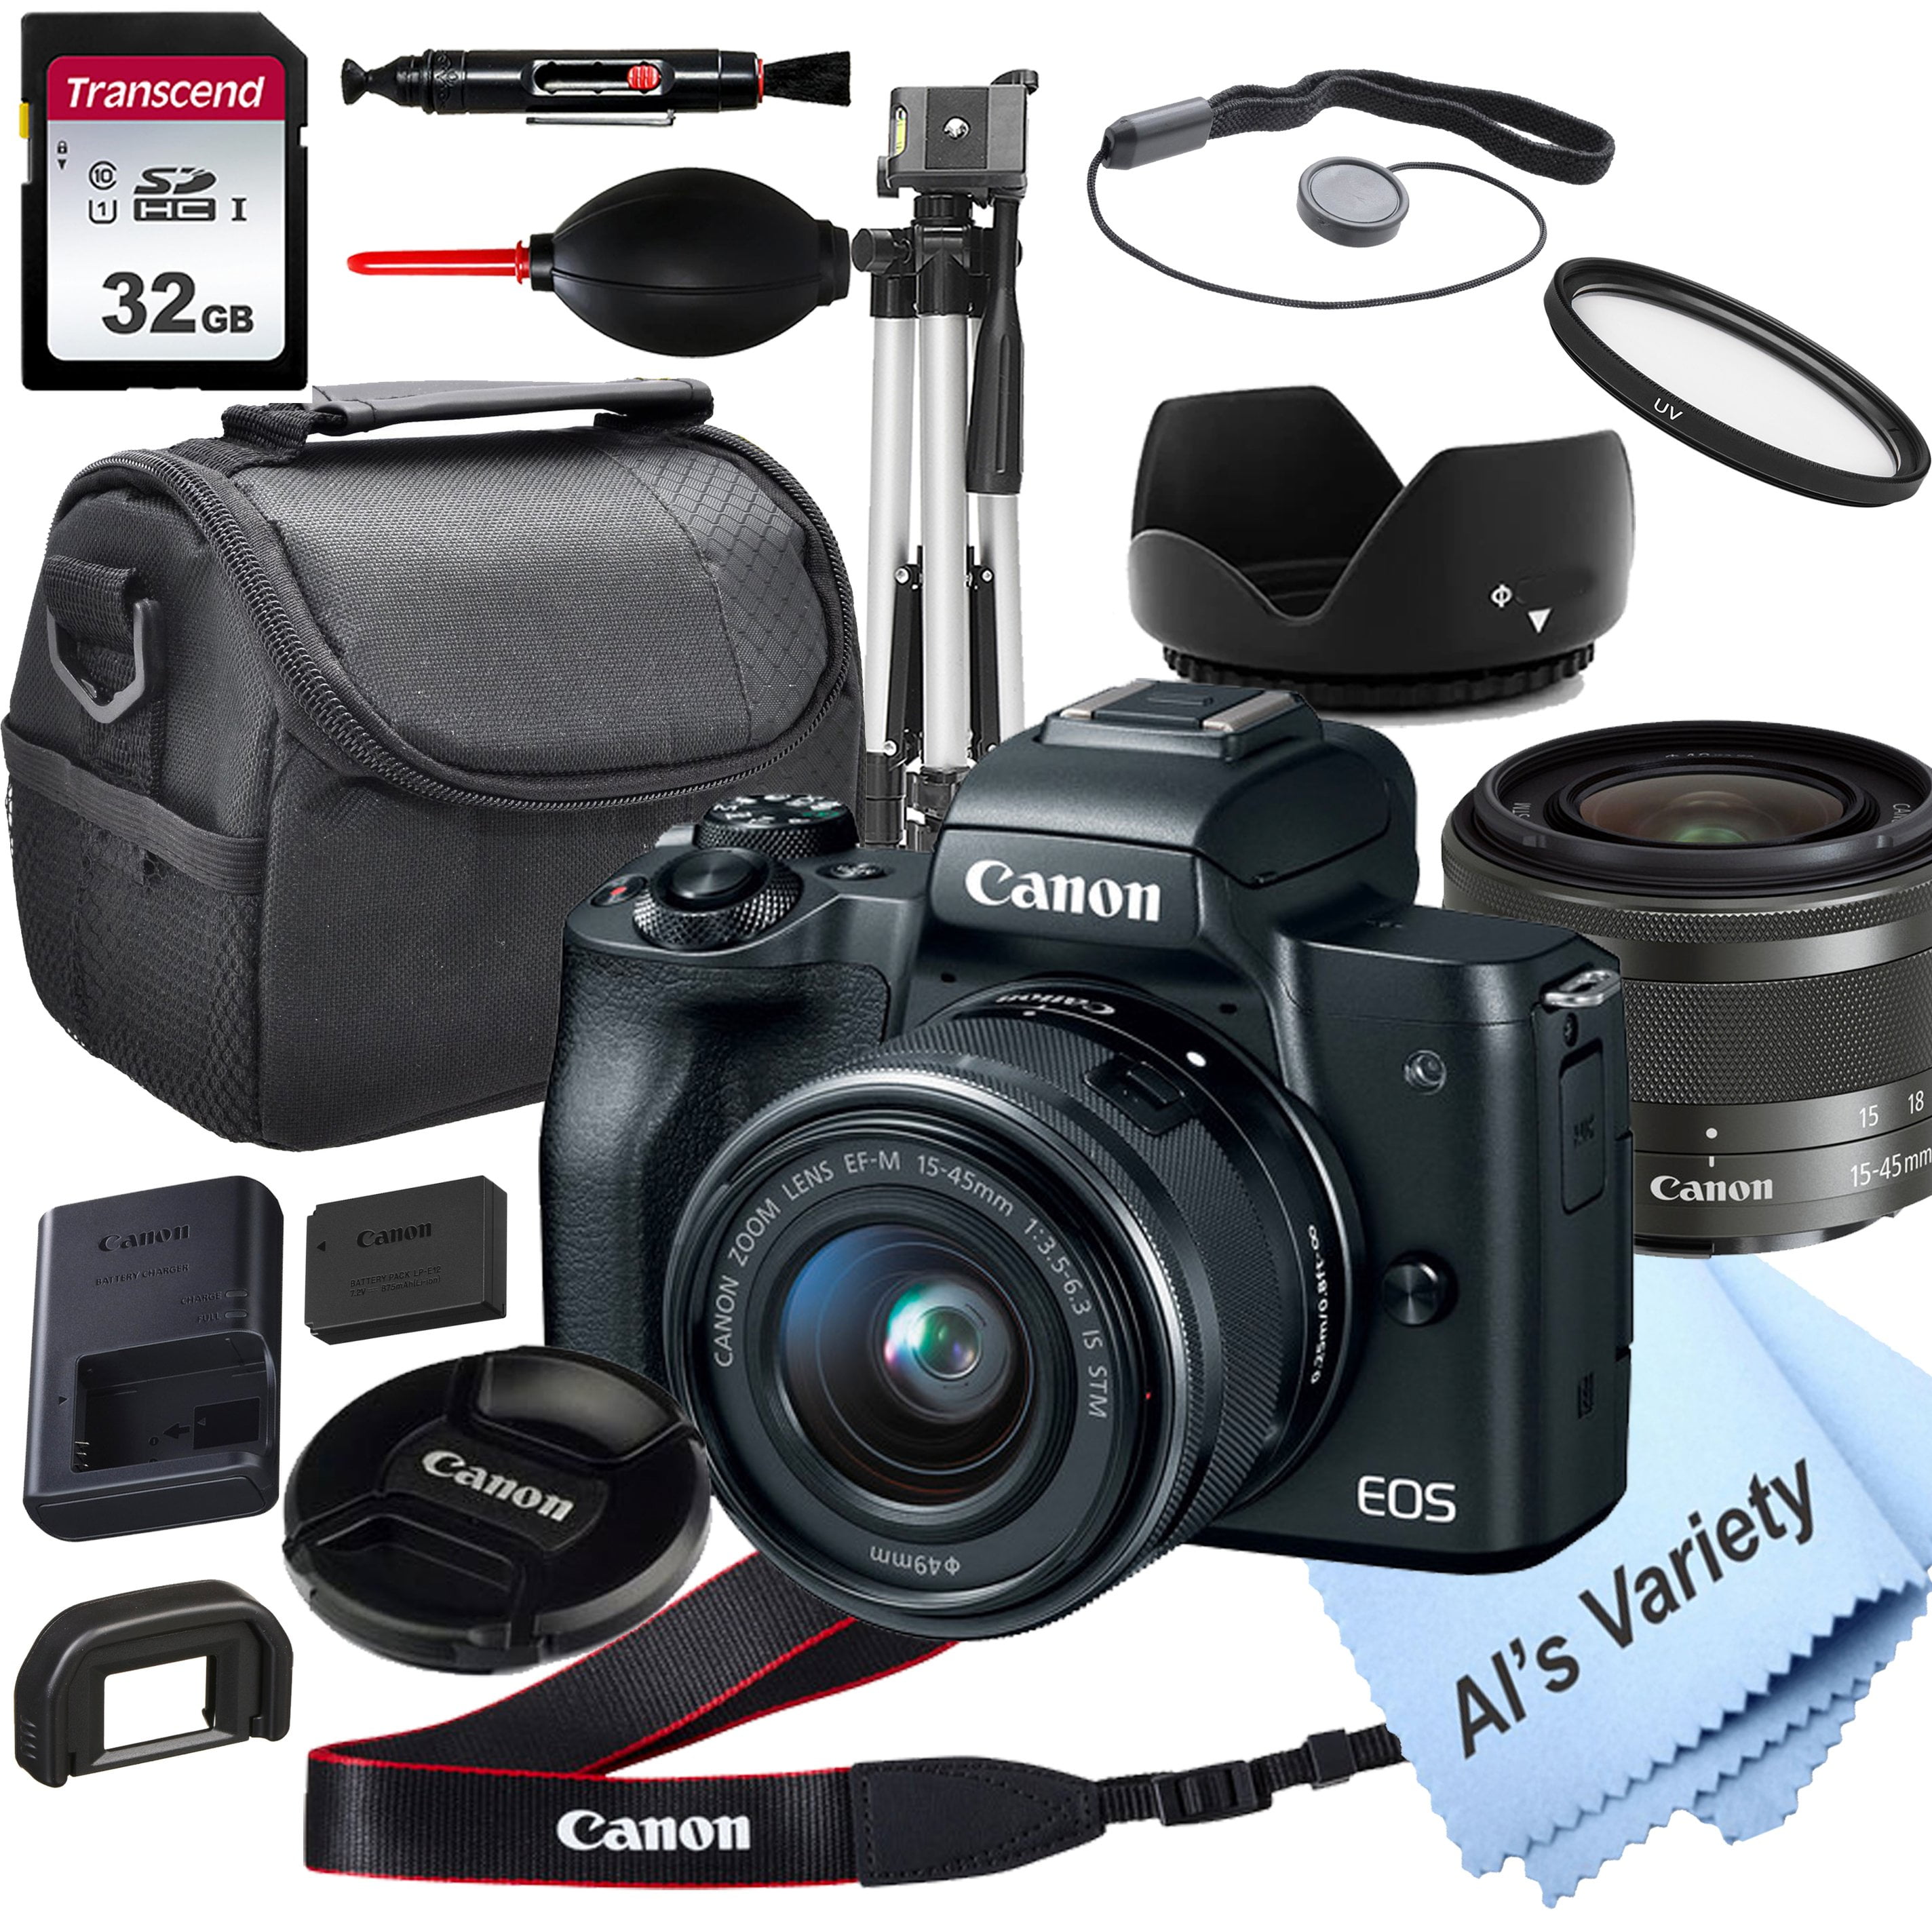 Canon EOS M50 Mirrorless Camera with 15-45mm Lens + 32GB Card, Tripod, and More Bundle -